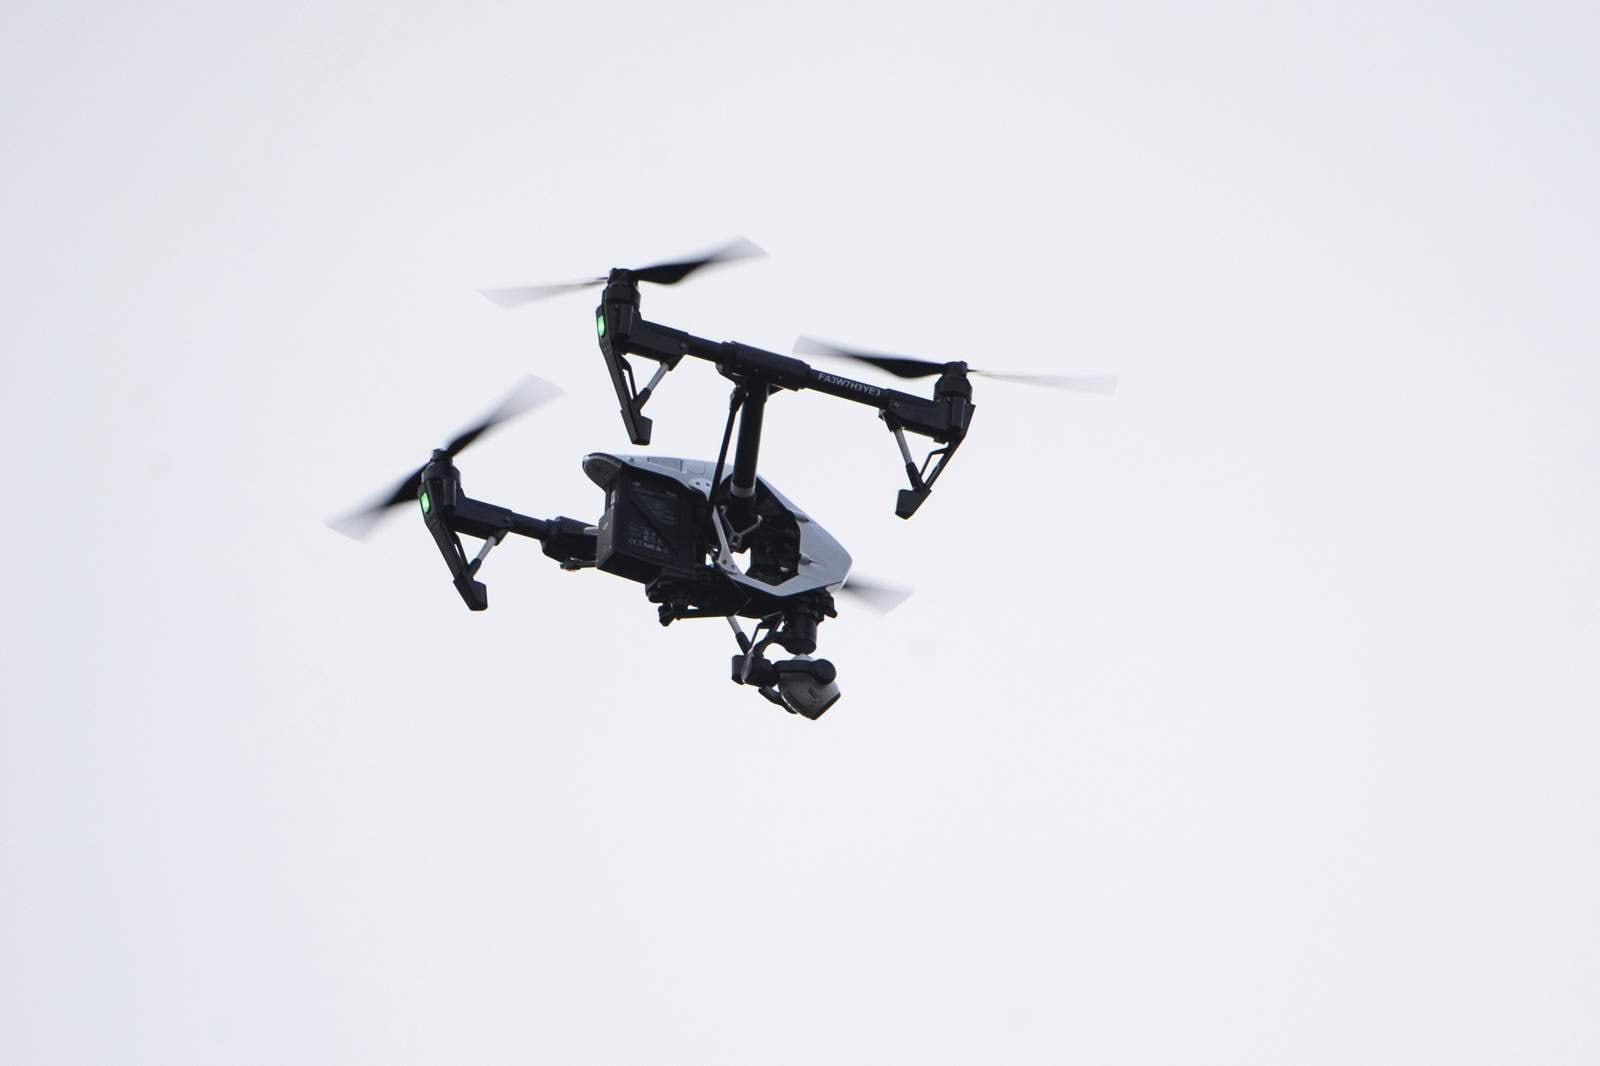 Florida could expand government use of drones, but not for this violation